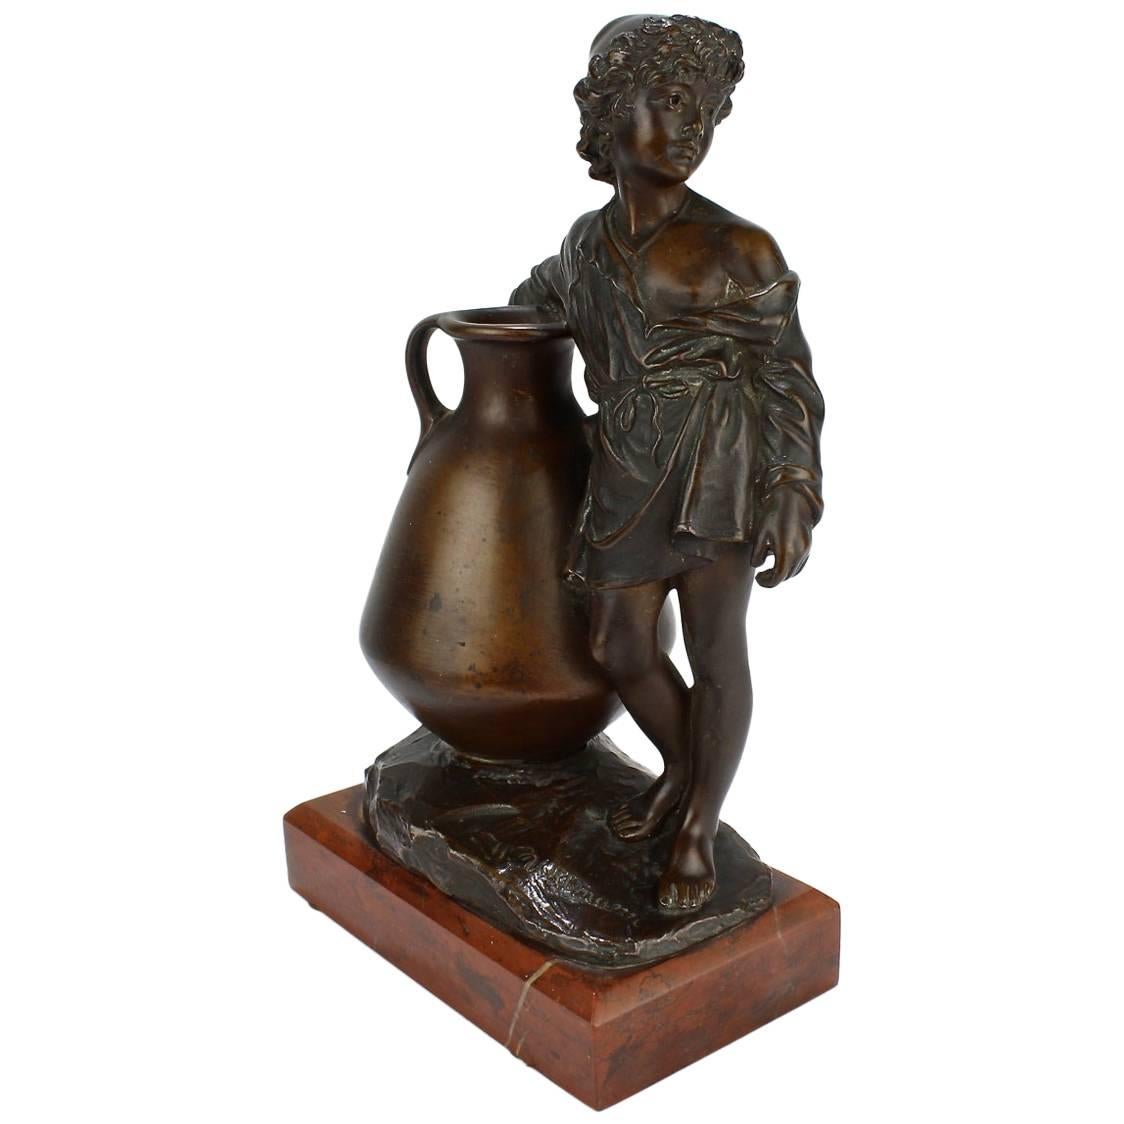 Antique German Orientalist Bronze Sculpture of a Young Boy with Urn by Uhlmann